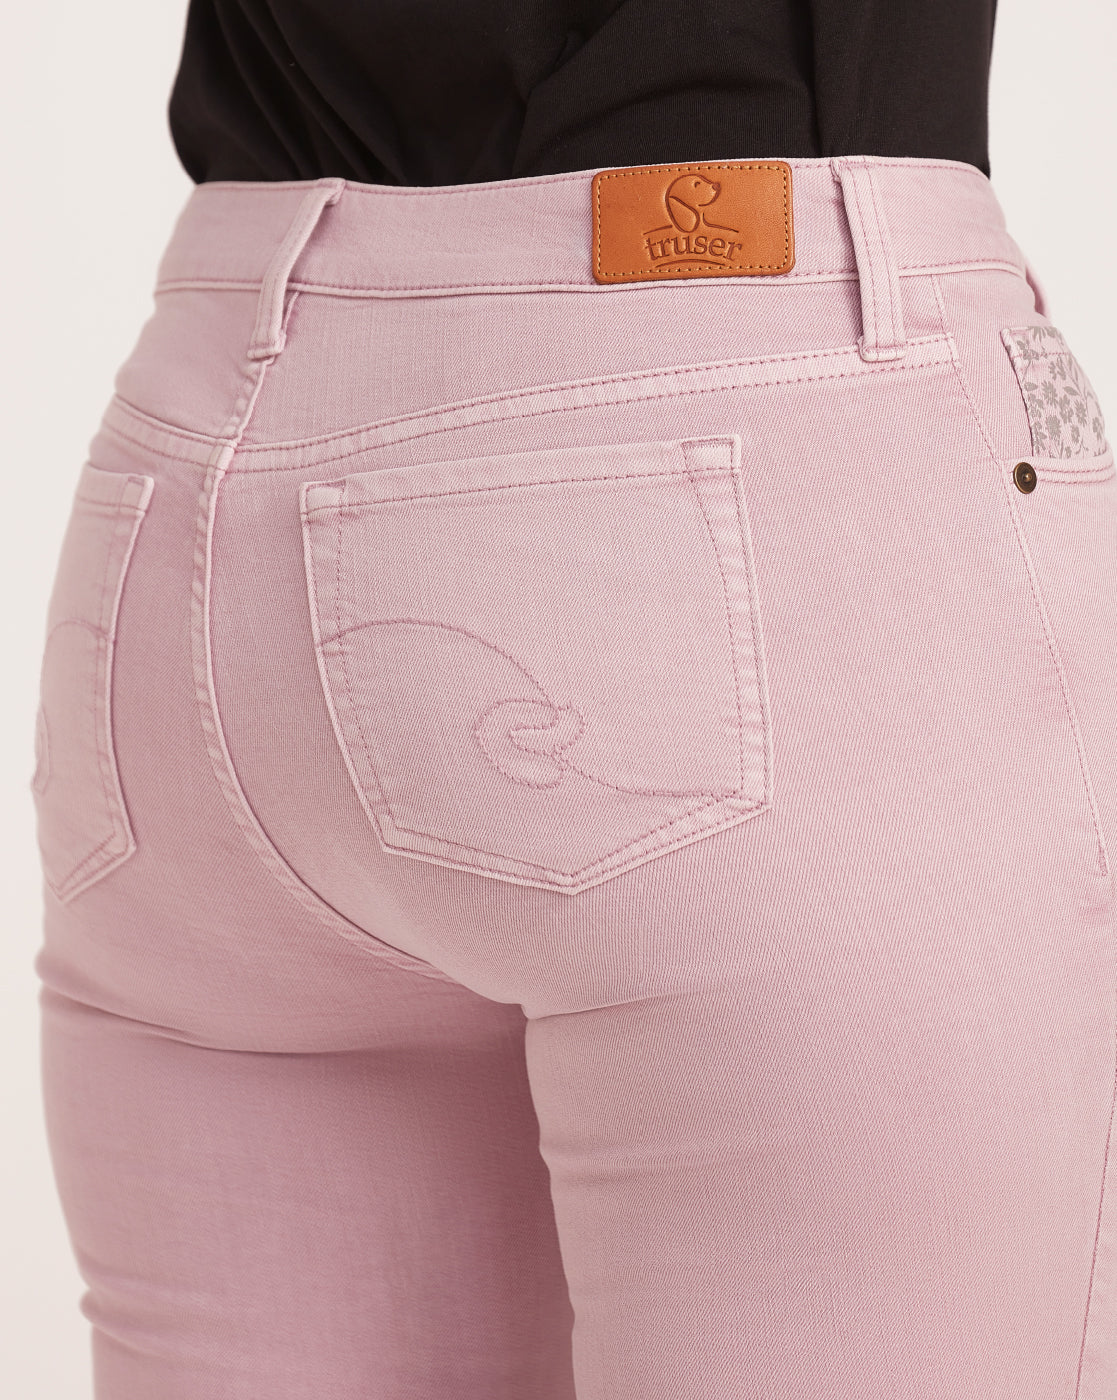 Fit And Flare Flare Mid Waist Colored Jeans - Lush Lilac